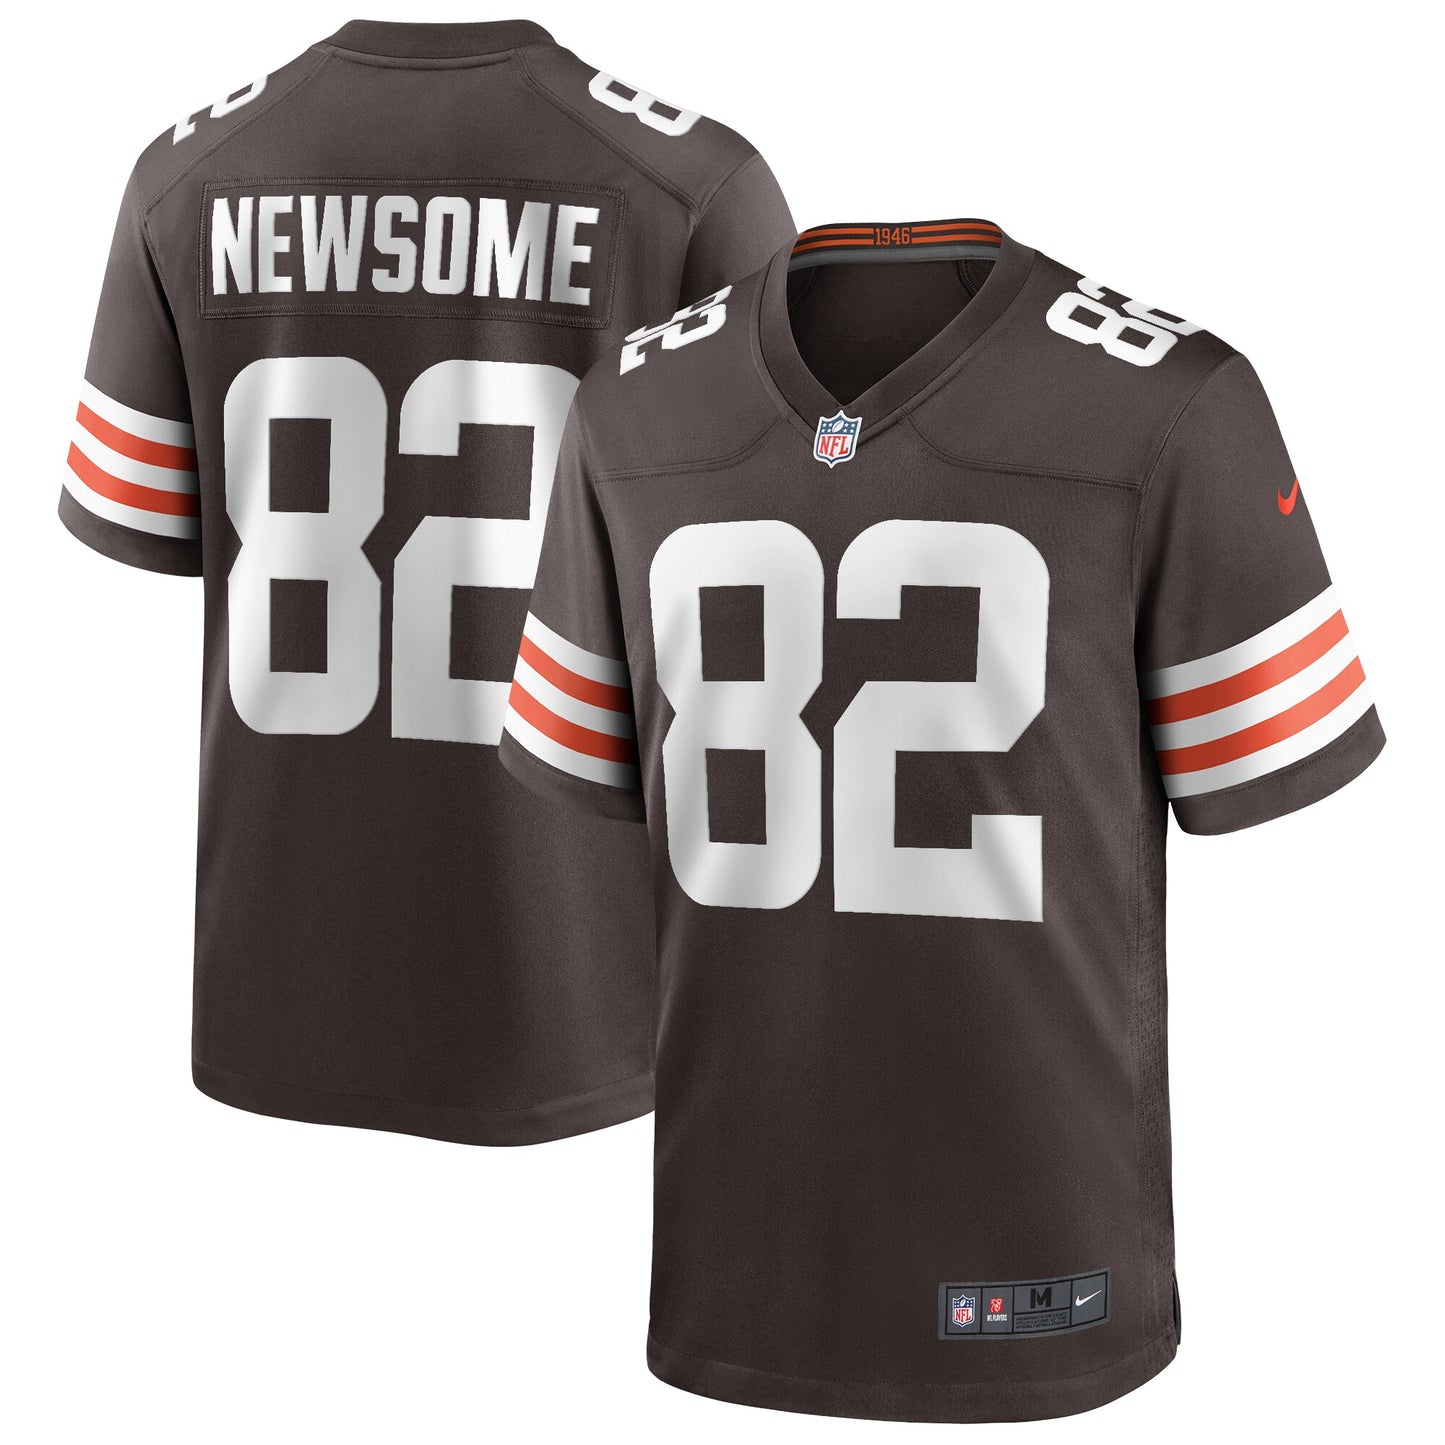 Ozzie Newsome Cleveland Browns Nike Game Retired Player Jersey - Brown